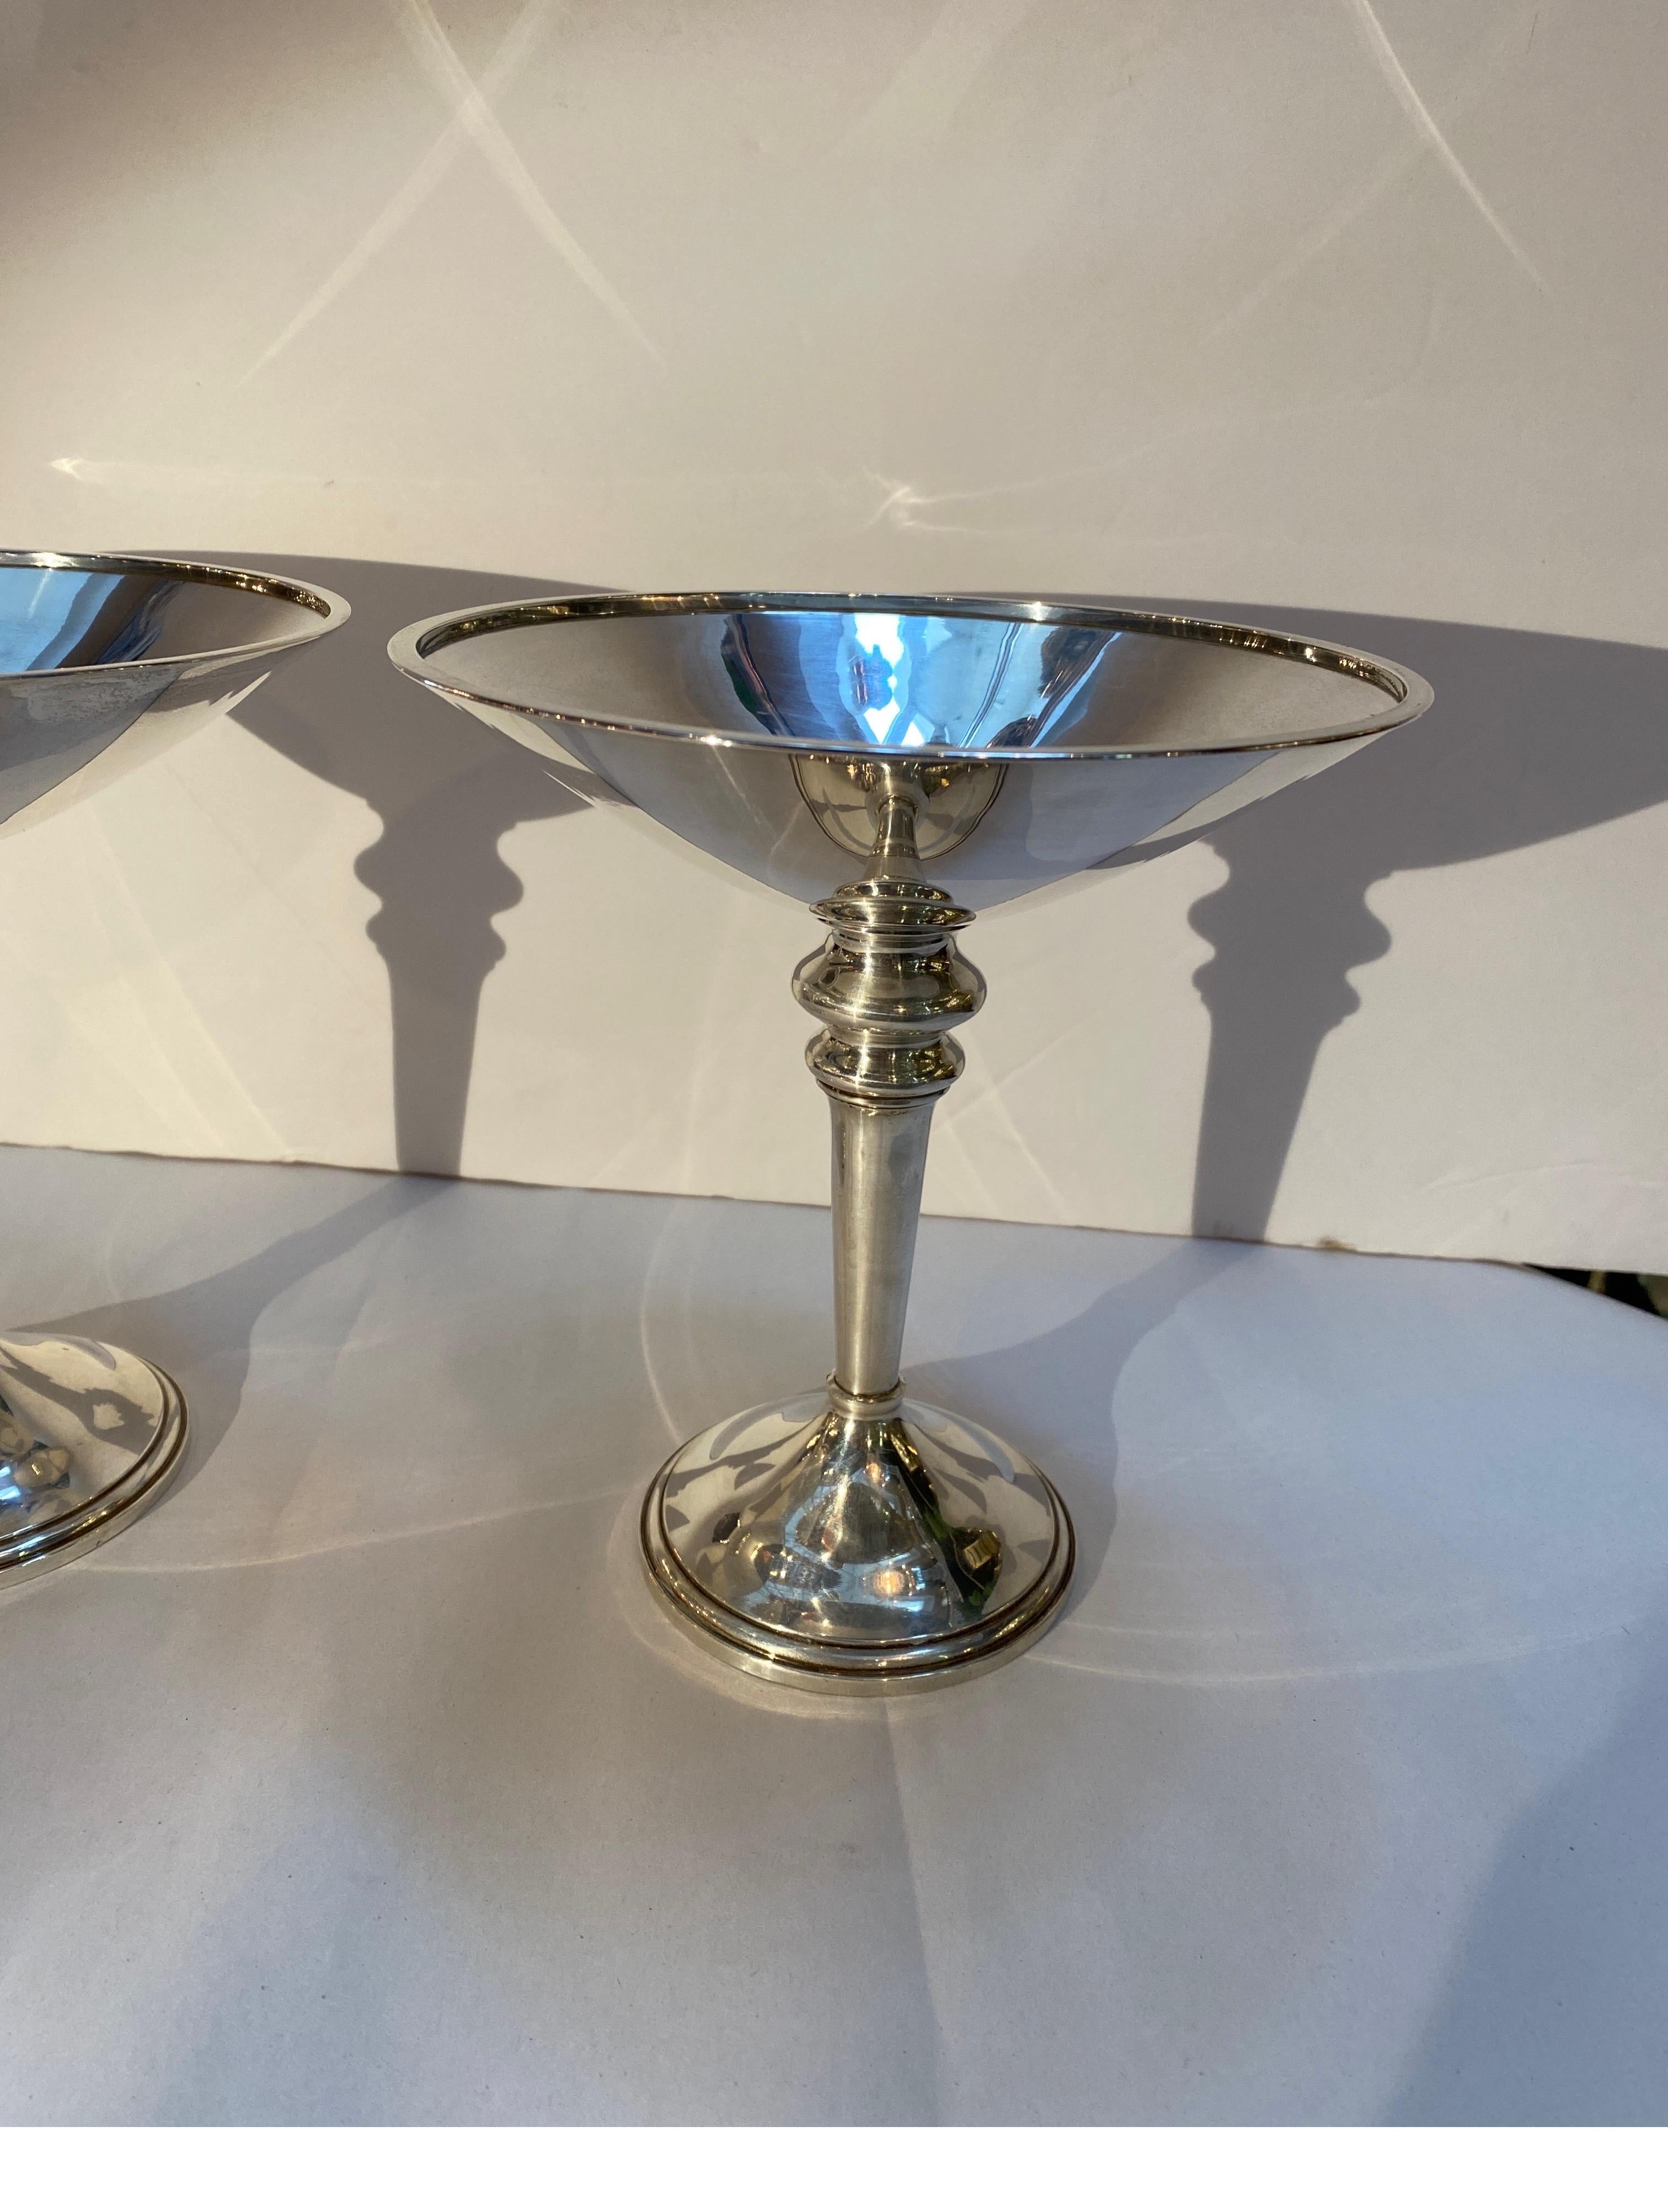 A chic pair of Mid-Century Modern sterling silver footed pedestal compost. The sleek form with balustrade style tapering columns with weighted round bases. These have an oversized martini glass shape. Made by the Elgin Silversmith Company.